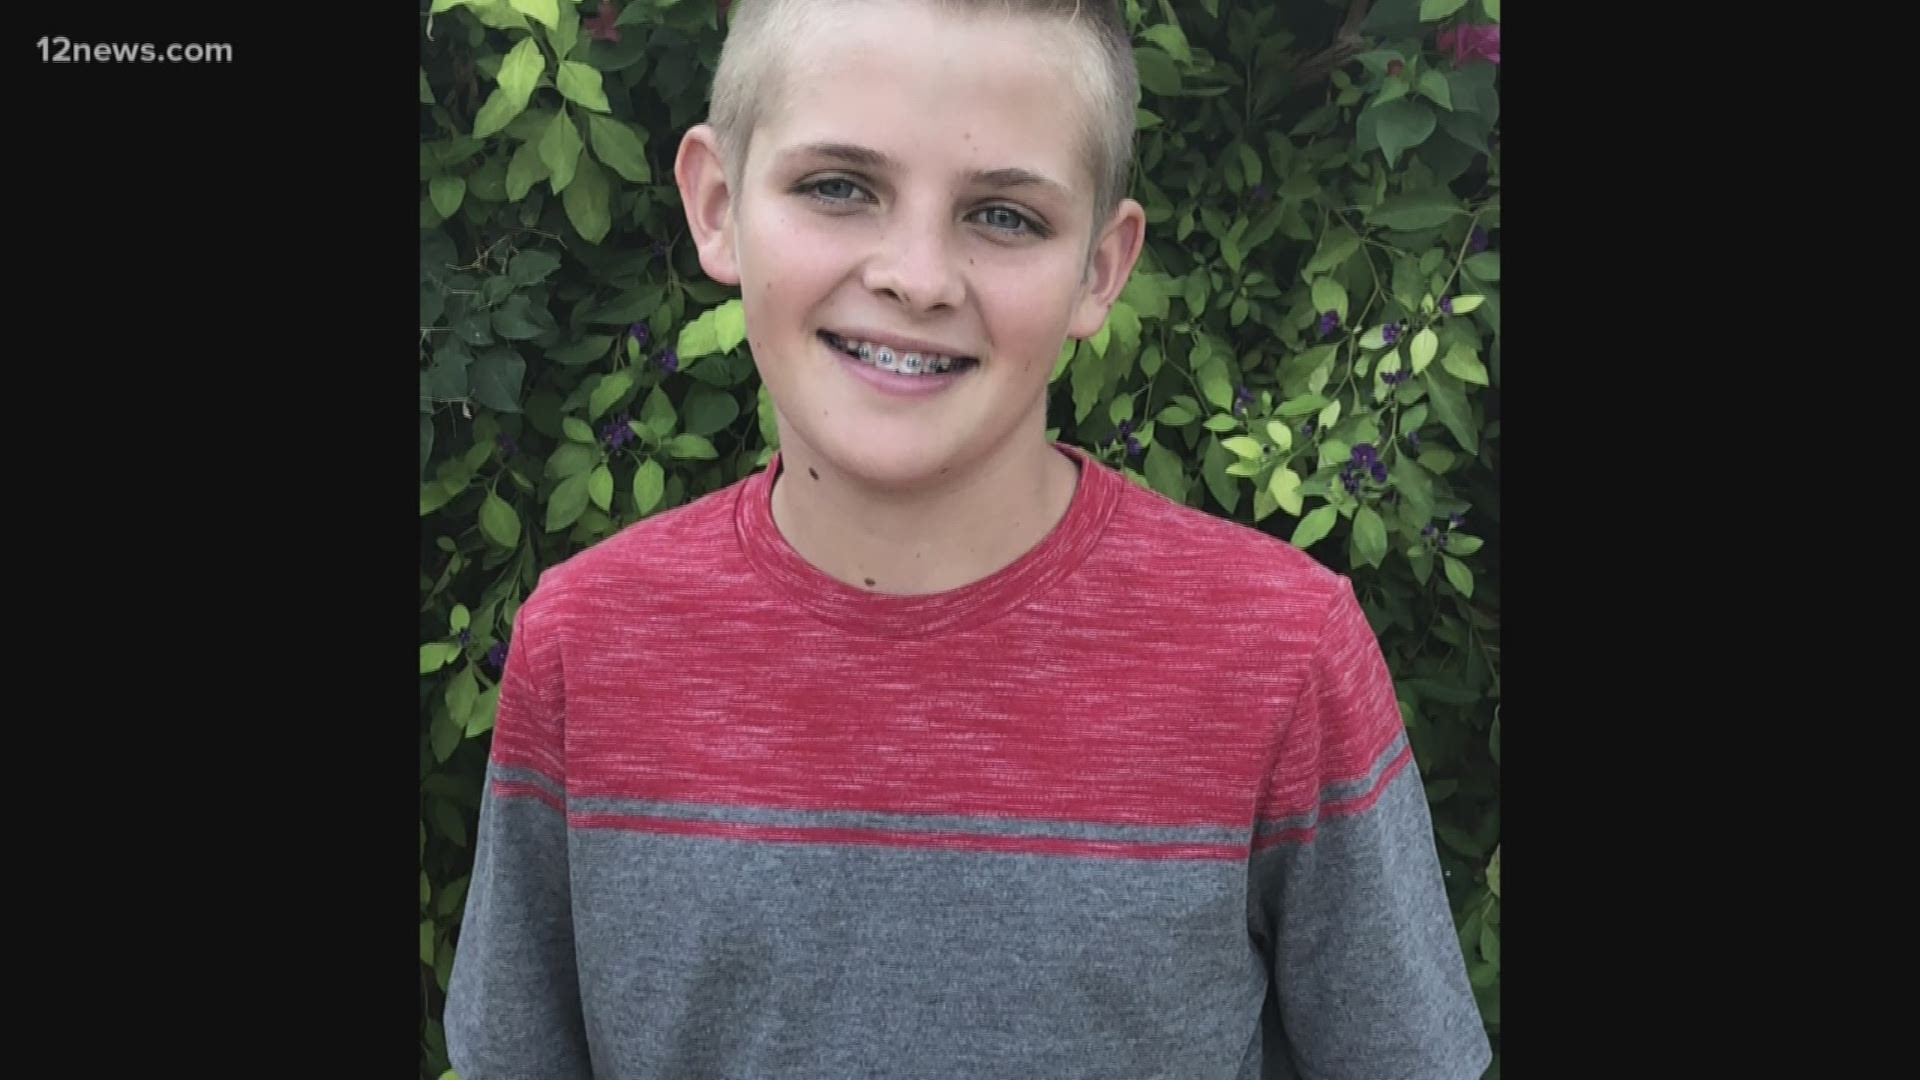 Talen Spitzer was diagnosed with AFM in June. His mother shares the struggle he and their family are going through because of the Polio-like disease.